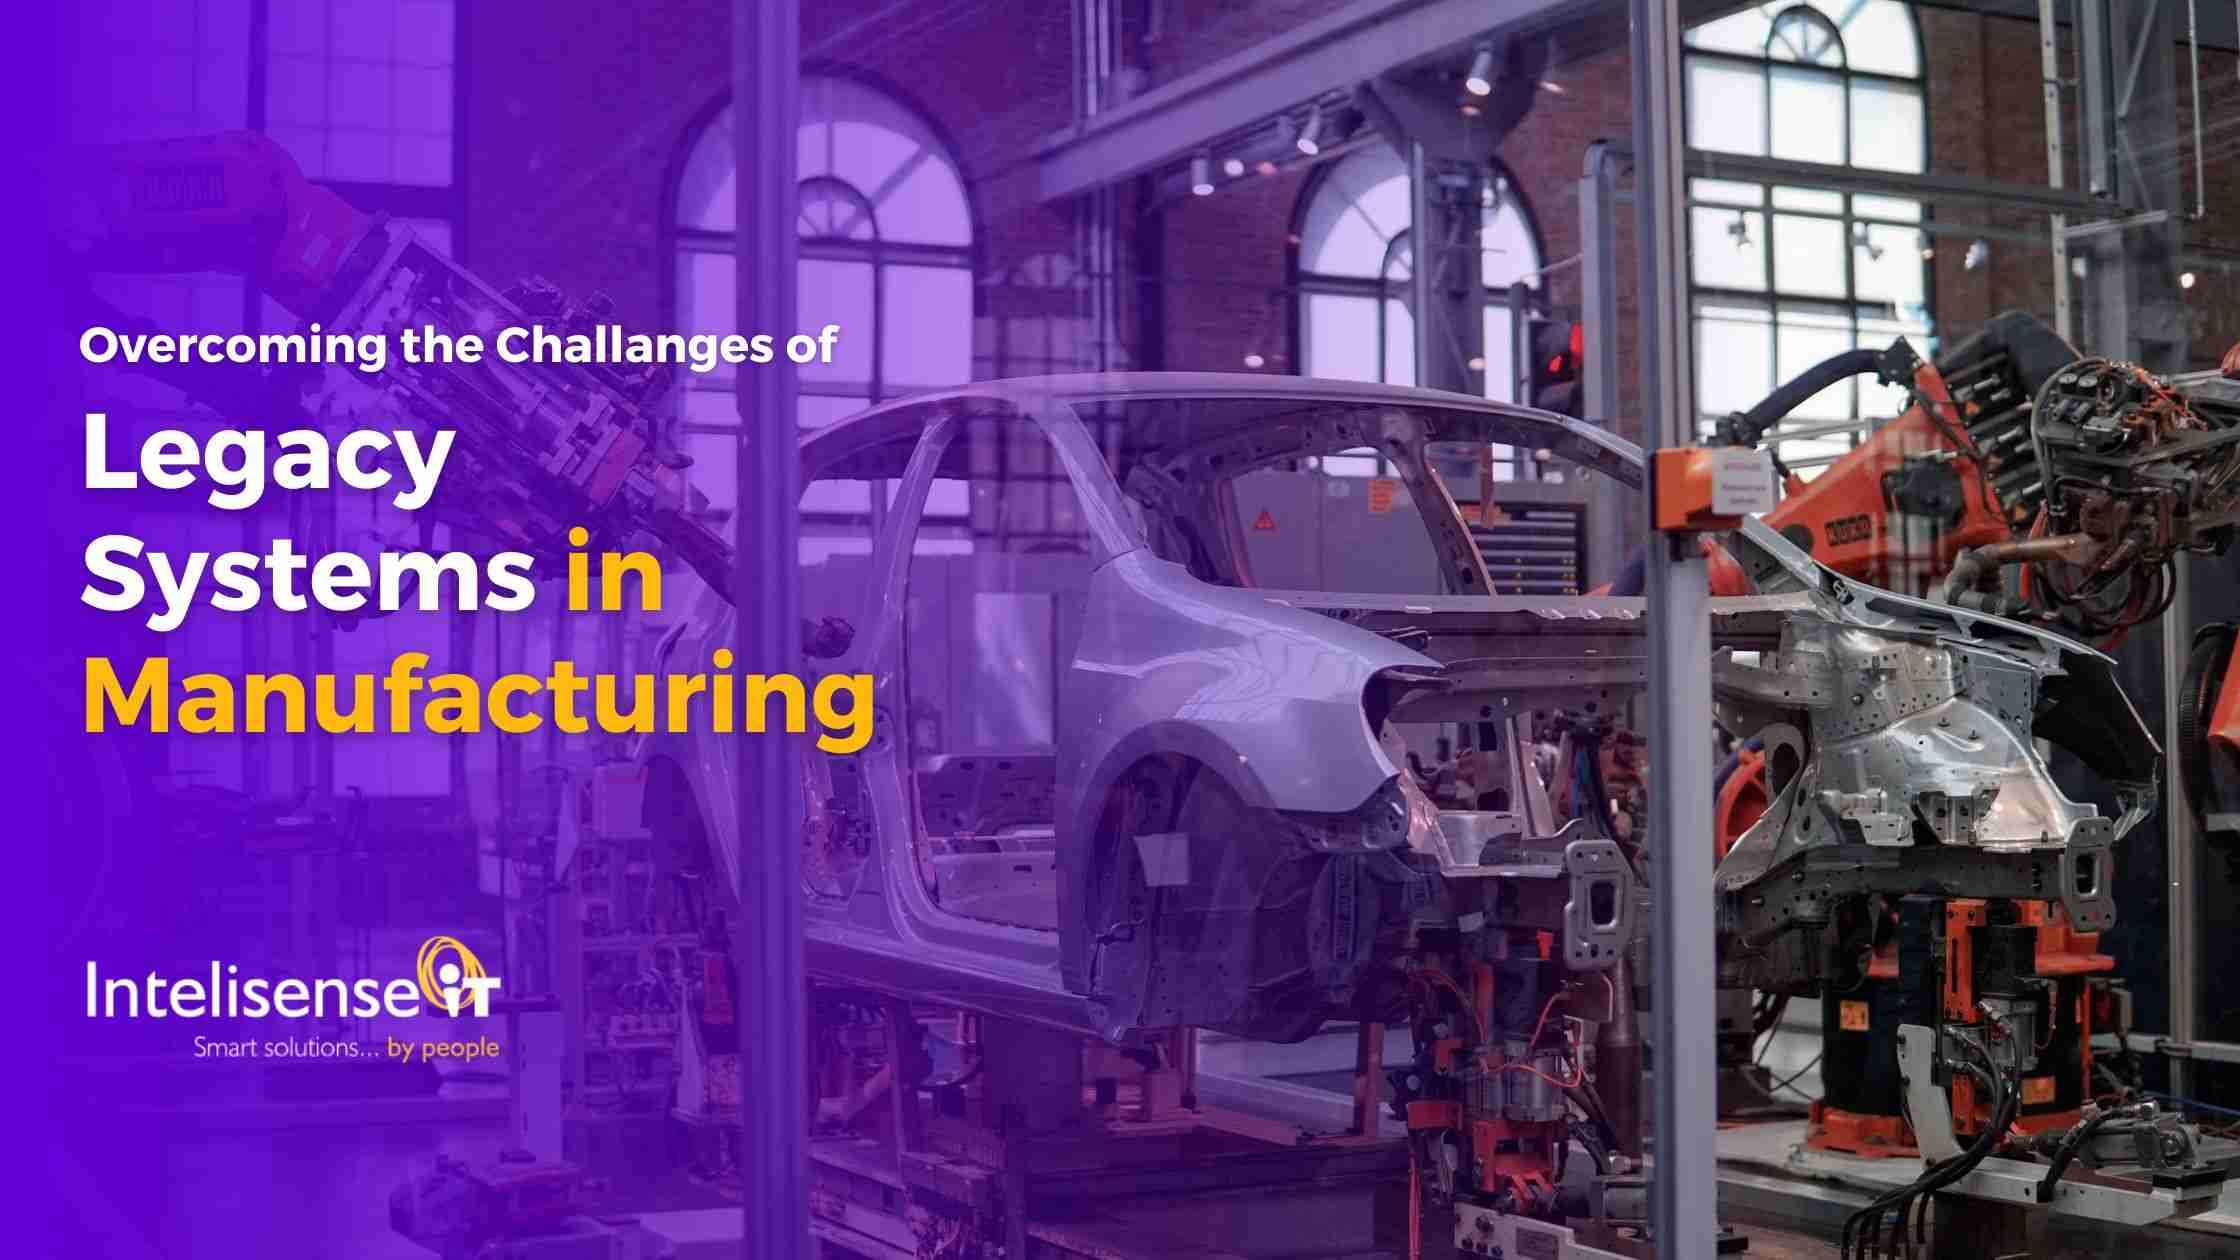 Overcoming the Challenges of Legacy Systems in Manufacturing